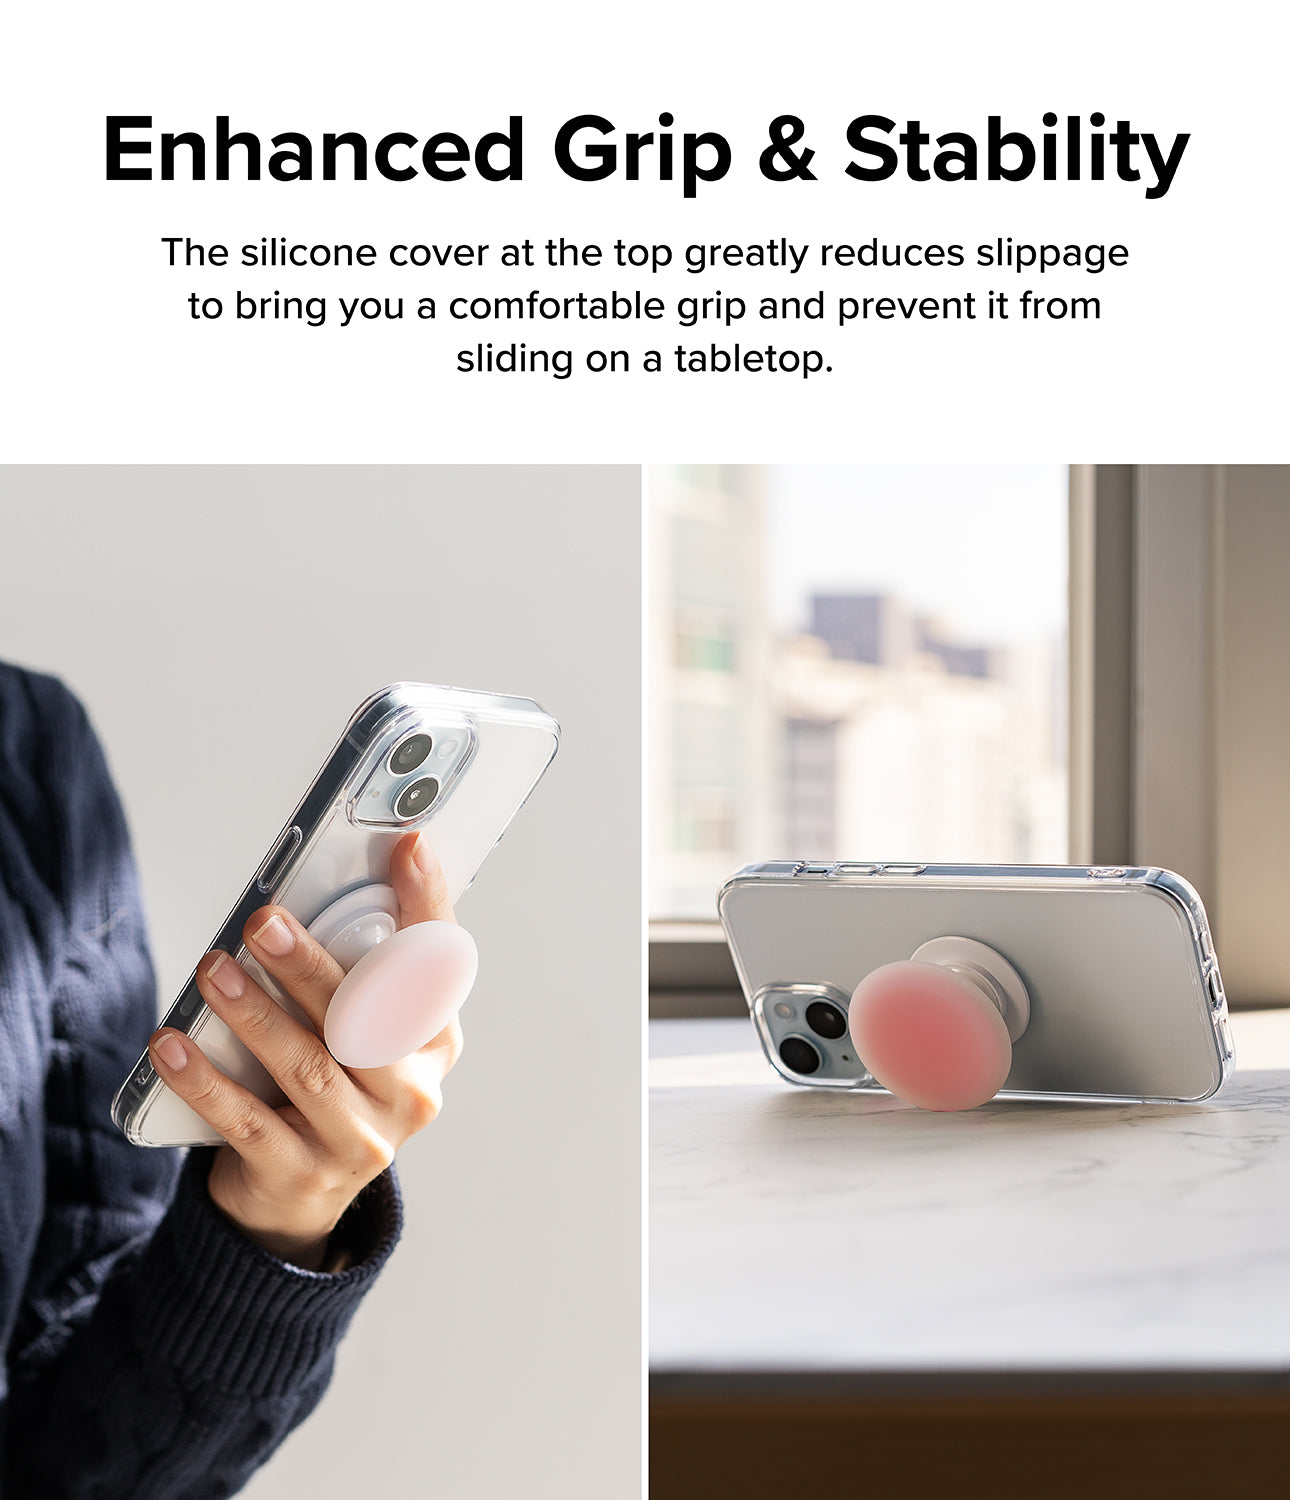 Ringke Tok - Enhanced Grip & Stability. The silicone cover at the top greatly reduces slippage to bring you a comfortable grip and prevent it from sliding on a table top.